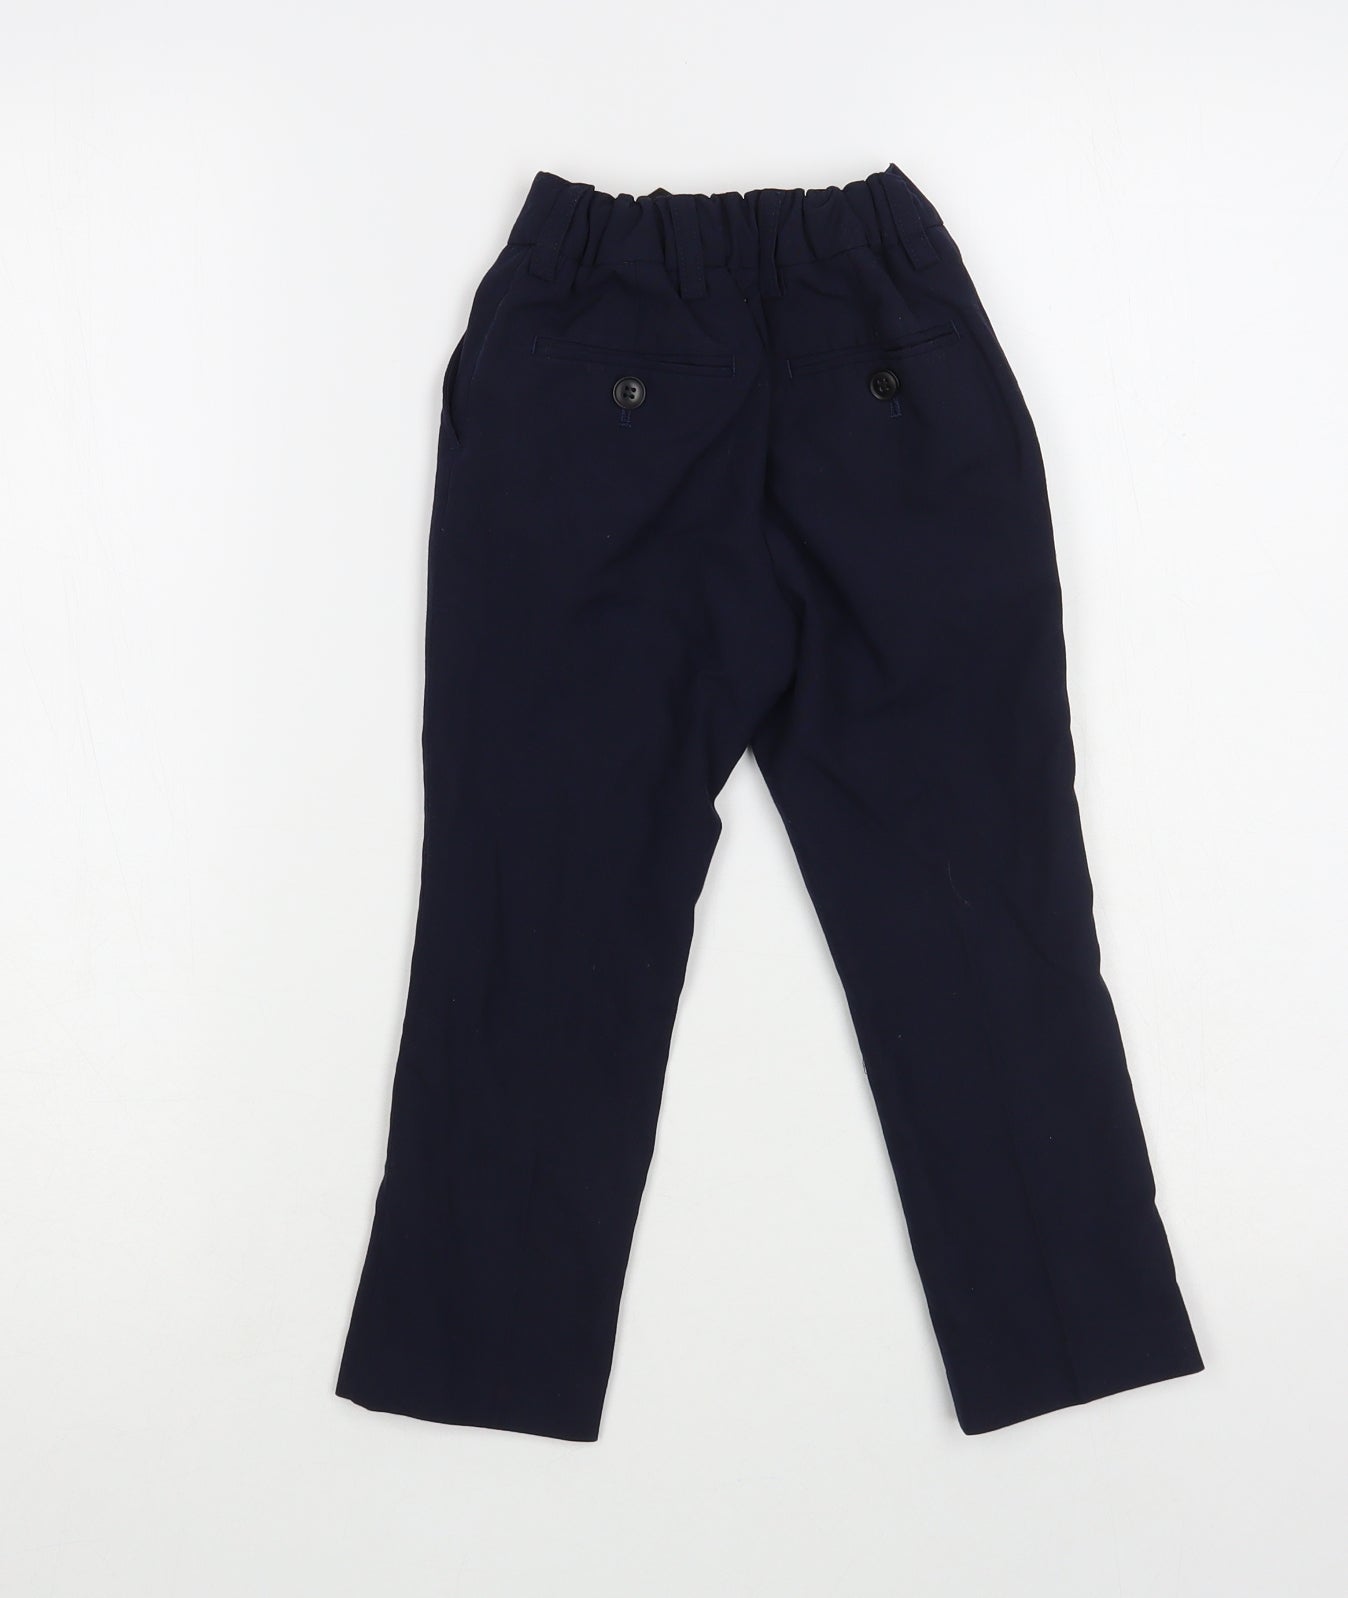 NEXT Boys Blue Polyester Dress Pants Trousers Size 4 Years Regular Button